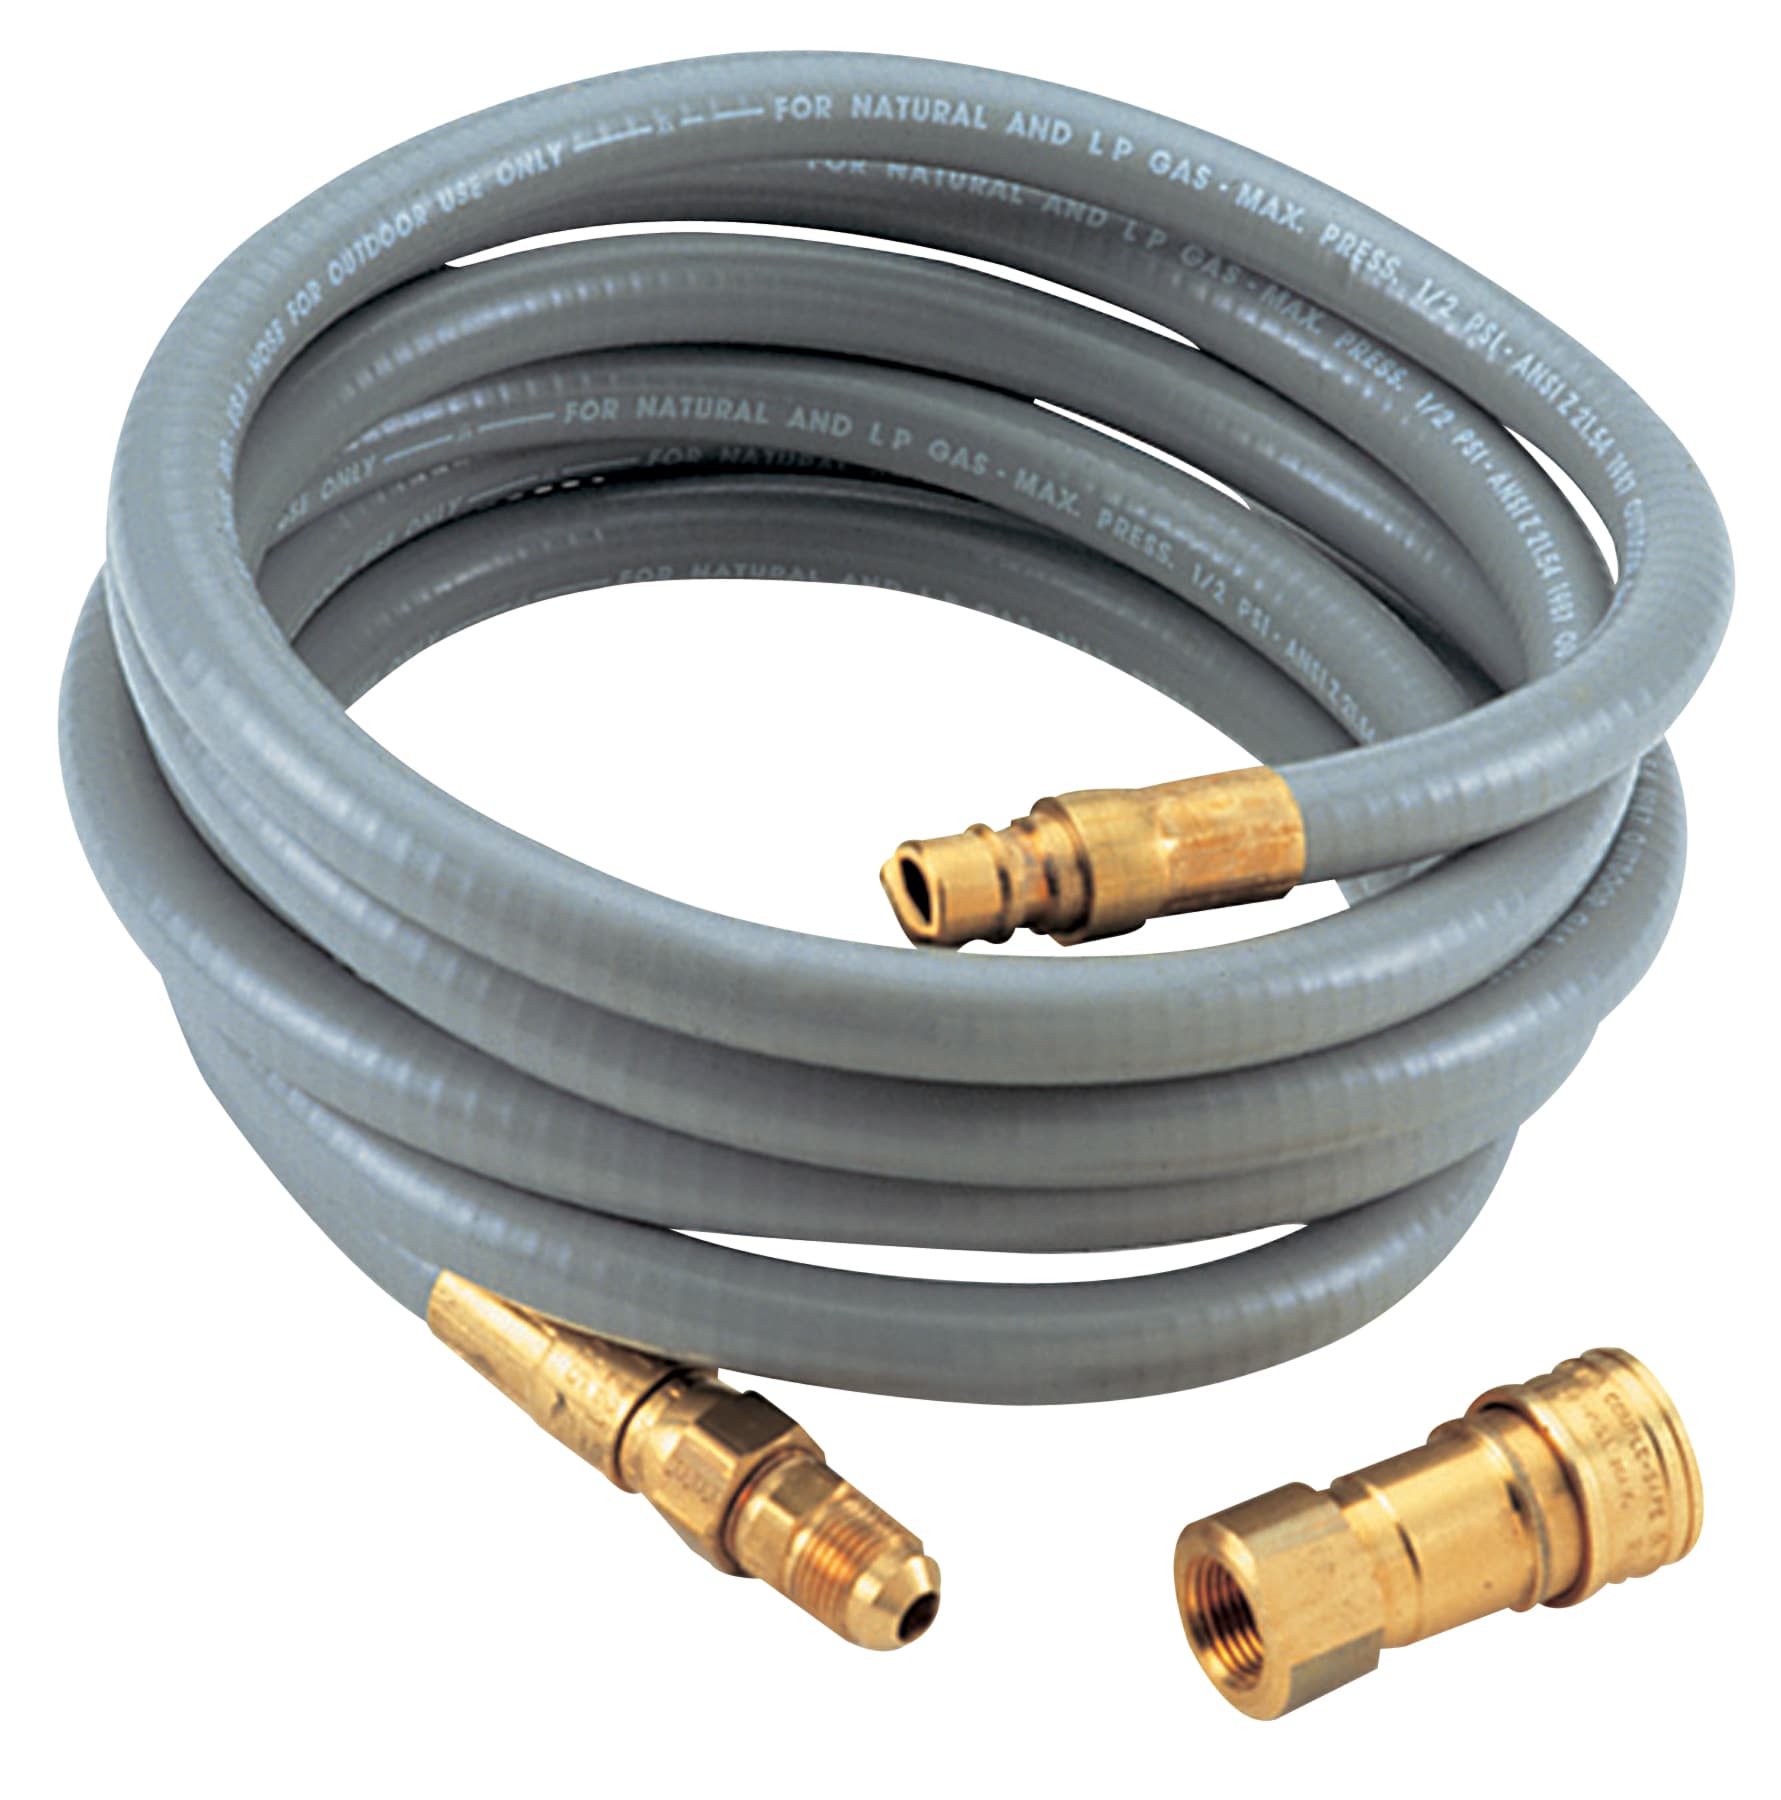 Char-Broil 5-Pack 3/8-in Rubber Natural Gas/Propane Hose at Lowes.com